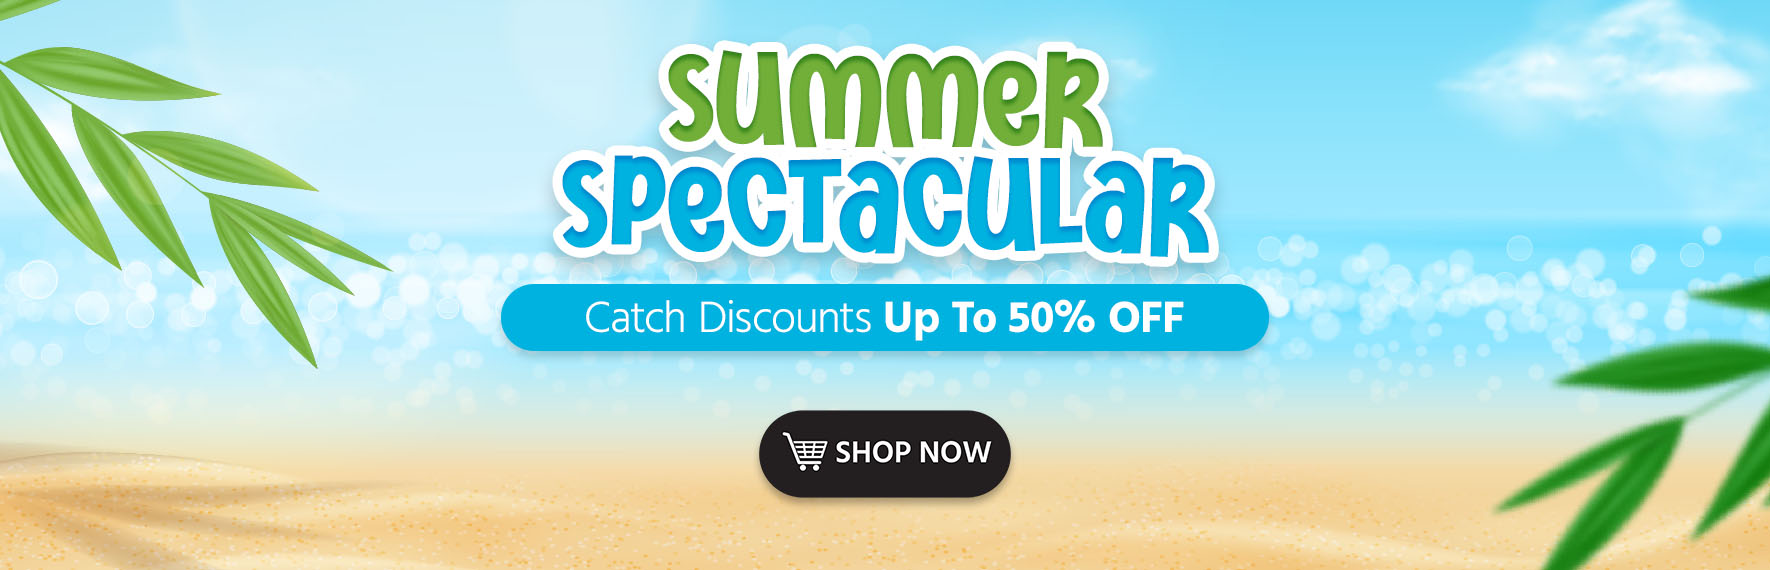 Summer Spectacular Catch Discounts Up to 50% Off! Shop Now